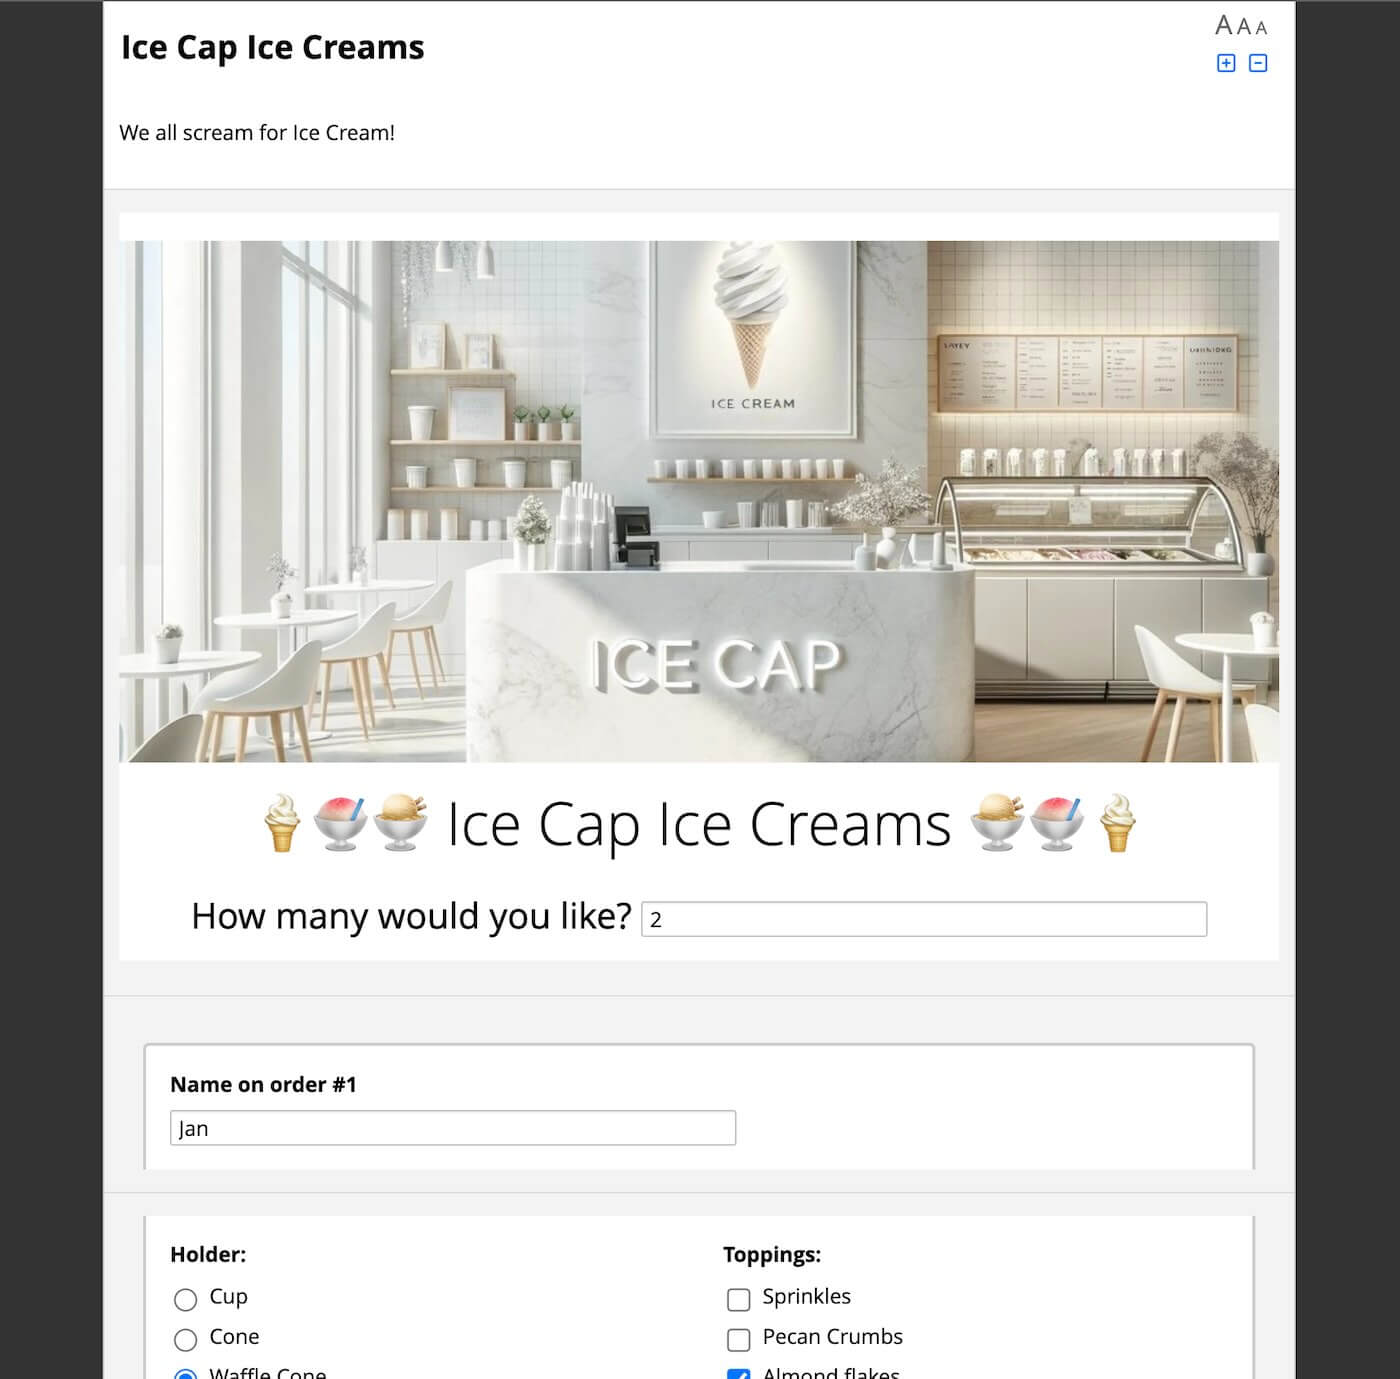 Fig 3. Ice Cap Ice Creams is an experiment in building loops and permutations. It dynamically creates a number of ice cream orders and flavors based on how the number of orders and scoops are requested. Fill it out here!